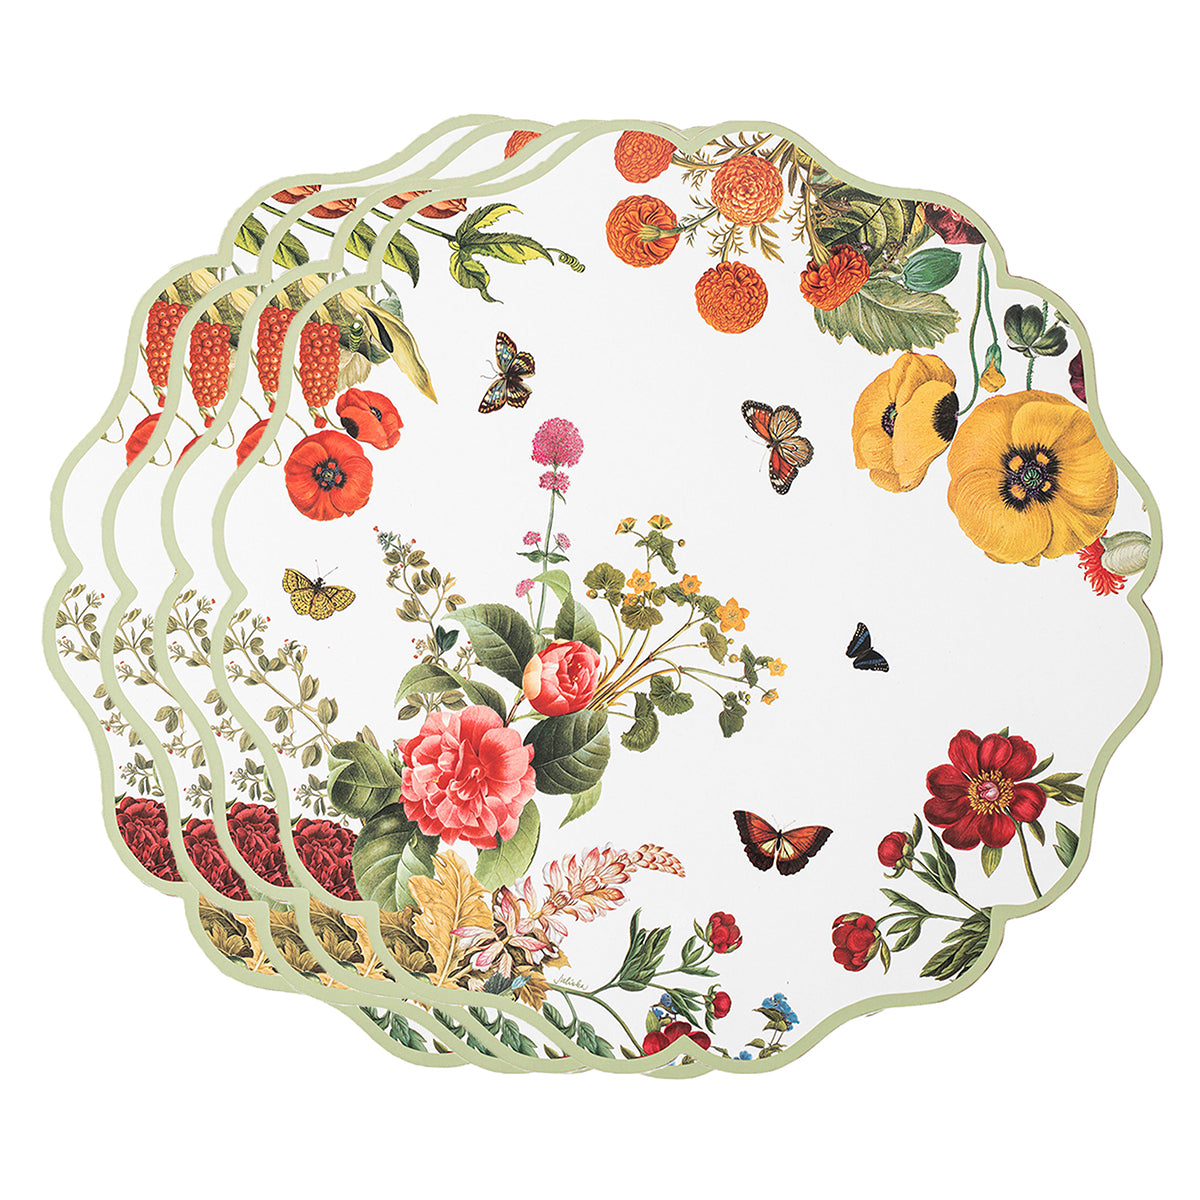 Field of Flowers Placemat Set of 4